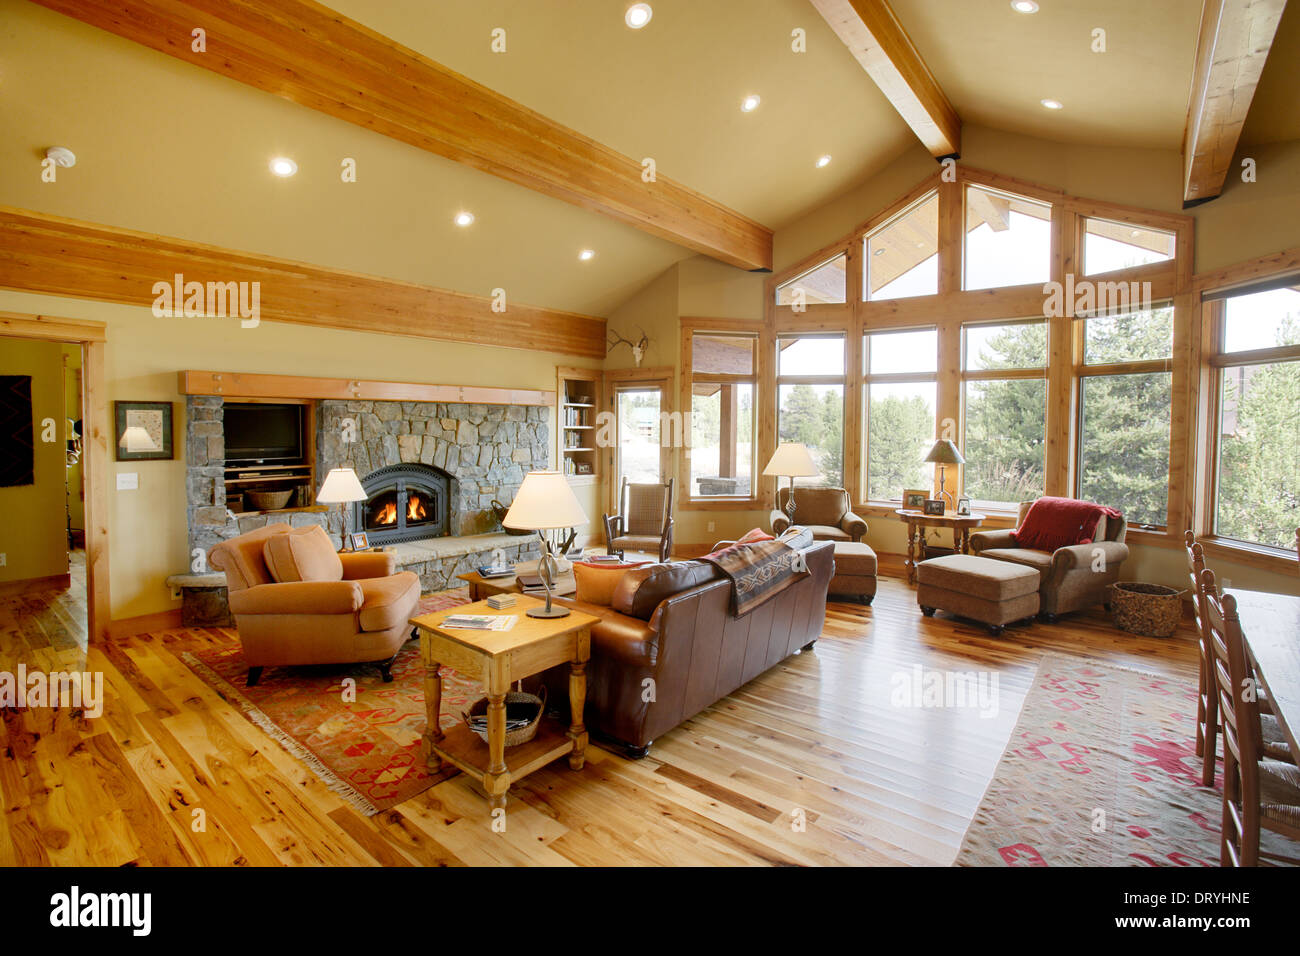 The Interior Of A Modern Log Cabin Depicting Luxury Amid A